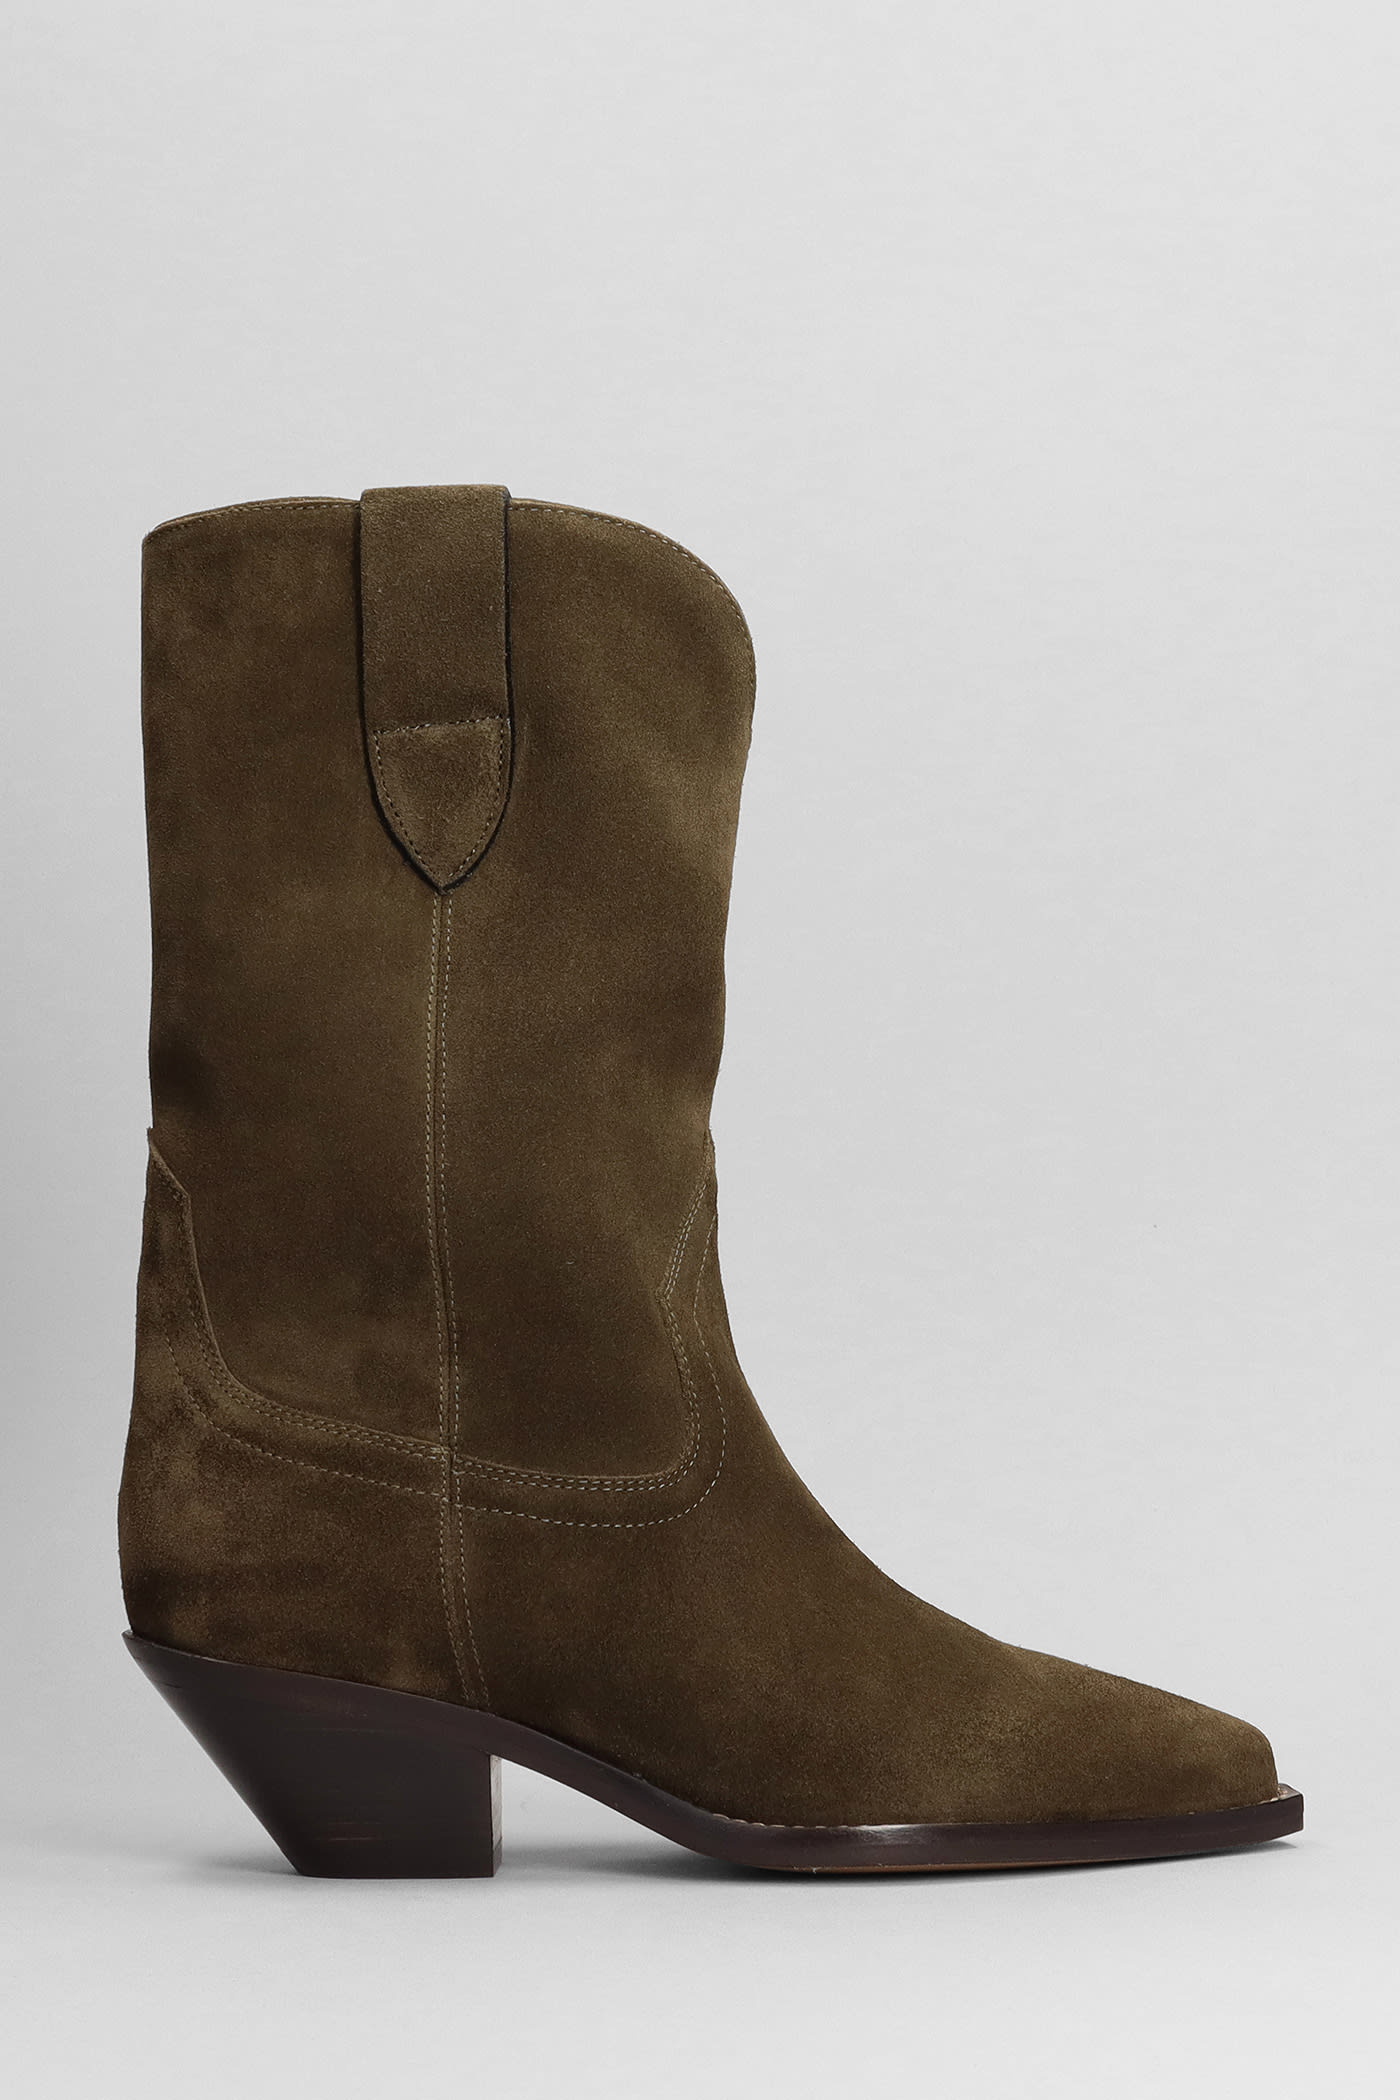 ISABEL MARANT DAHOPE TEXAN ANKLE BOOTS IN KHAKI SUEDE